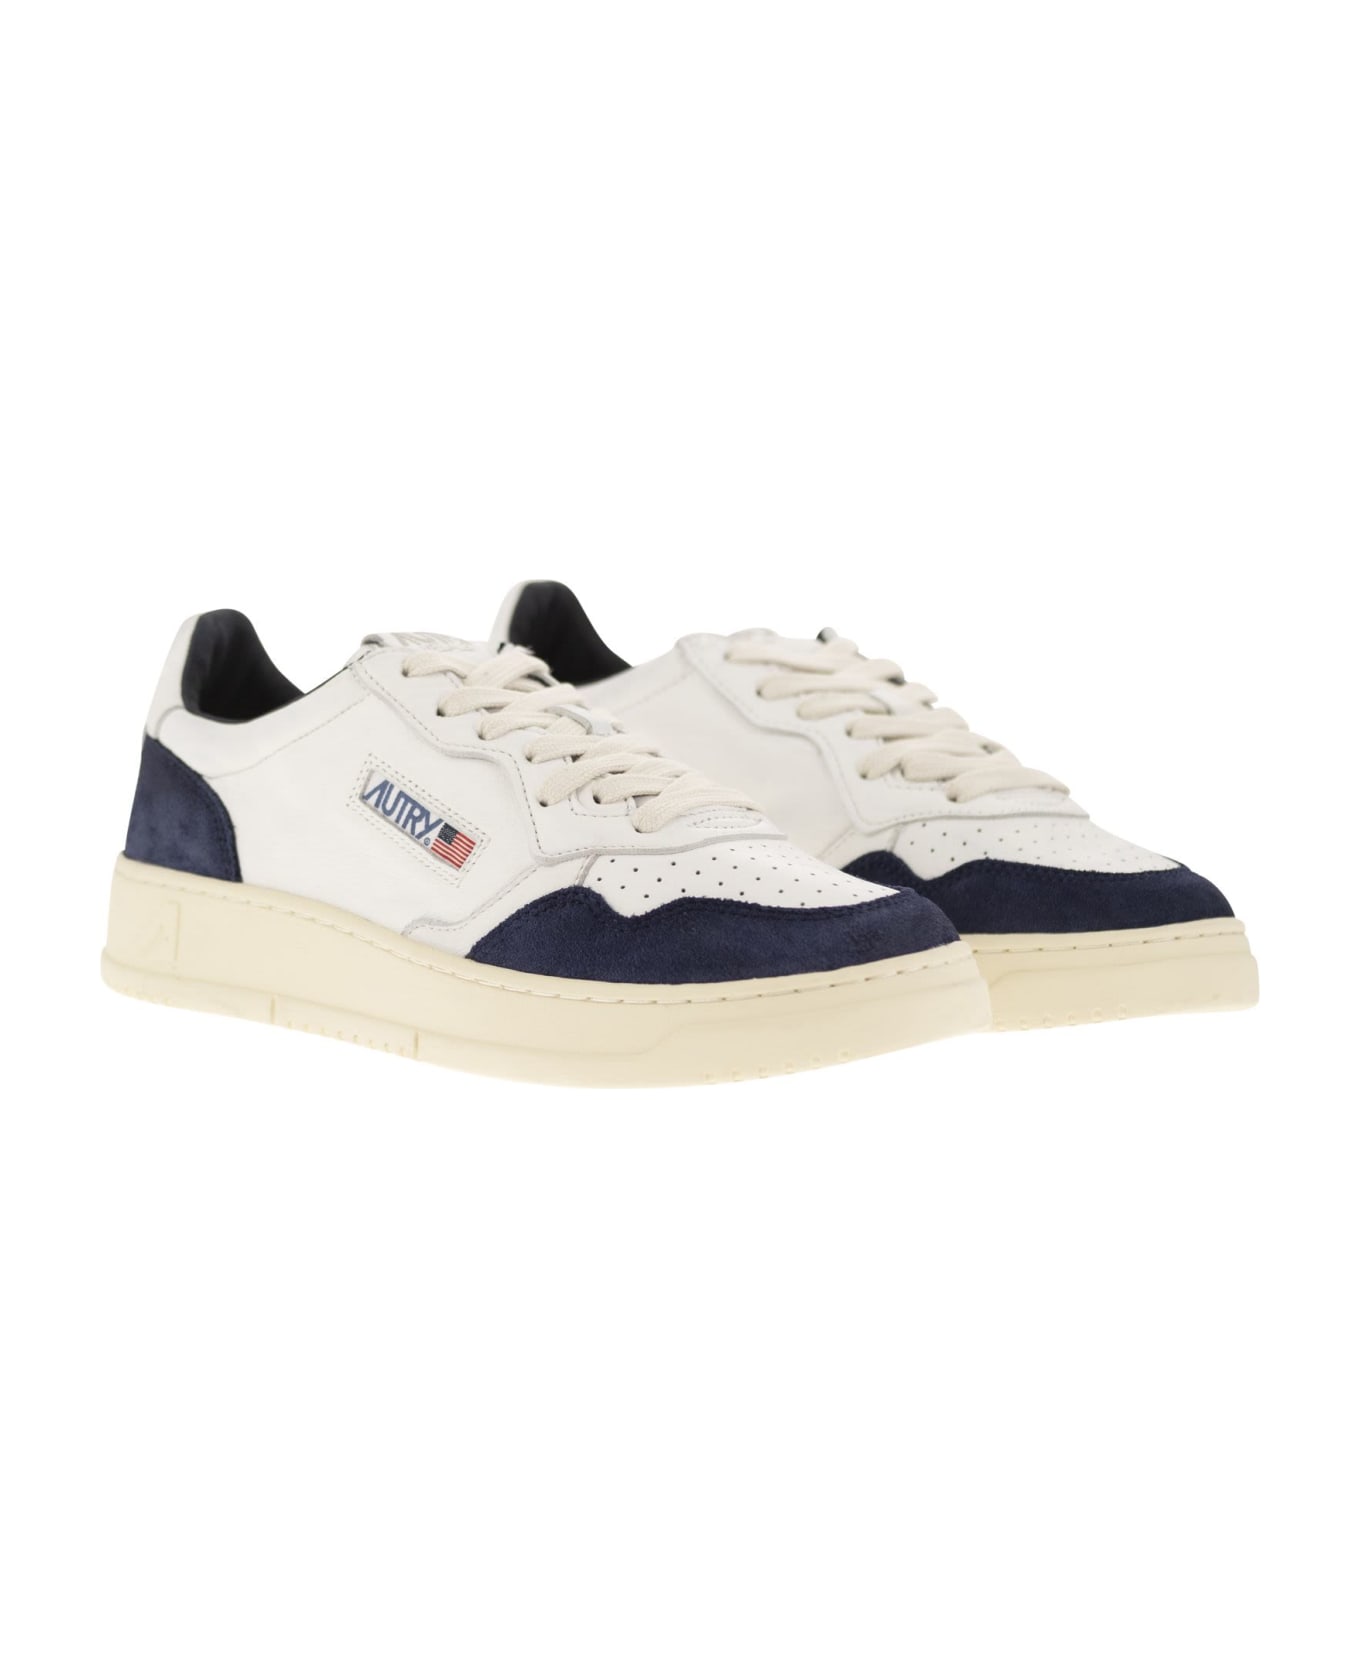 Autry Medalist Low Sneakers - White/blue スニーカー